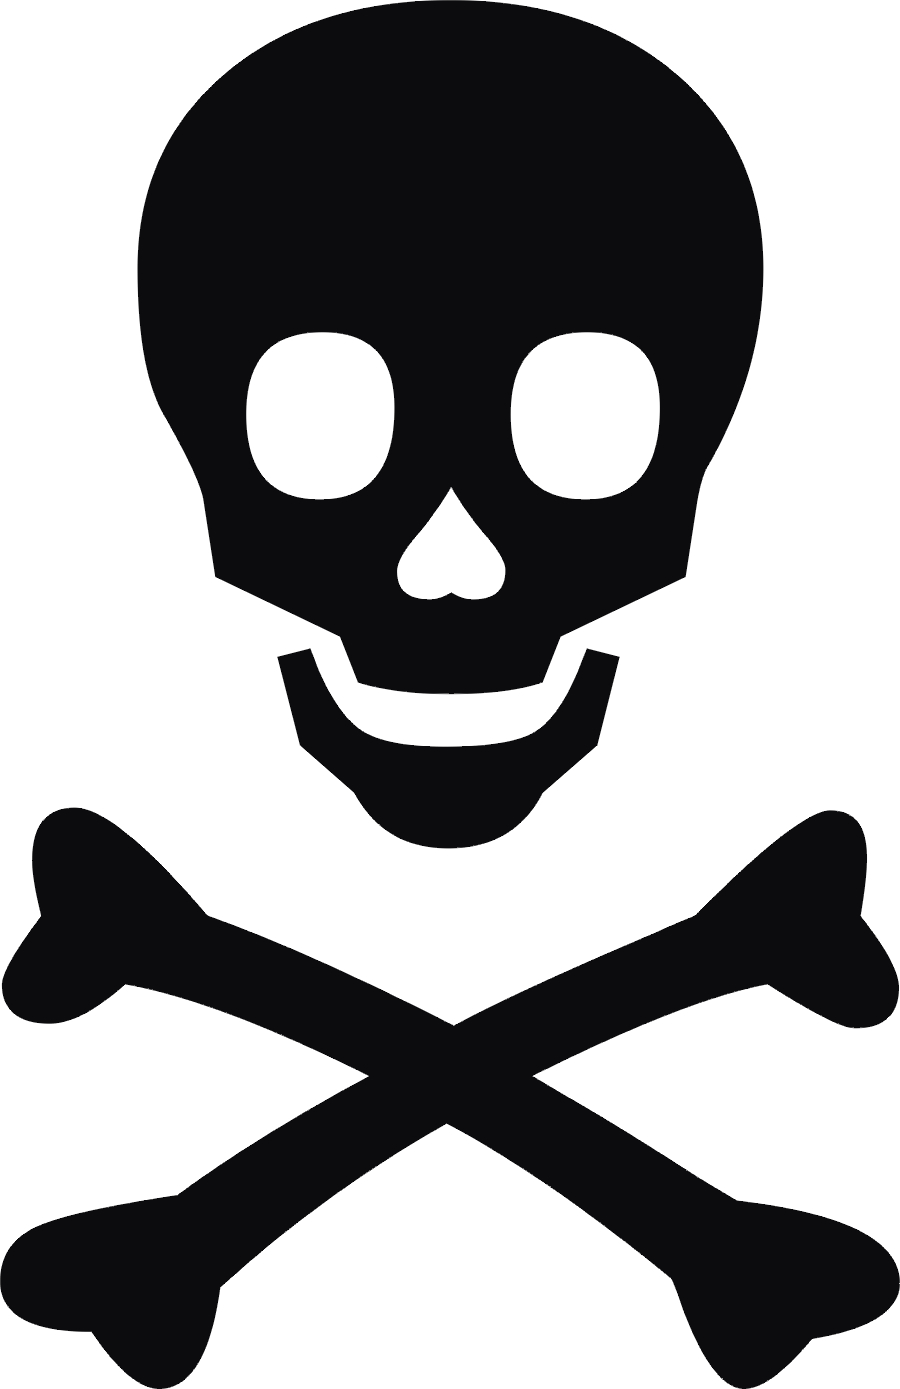 Skull And Crossbones Images Free 